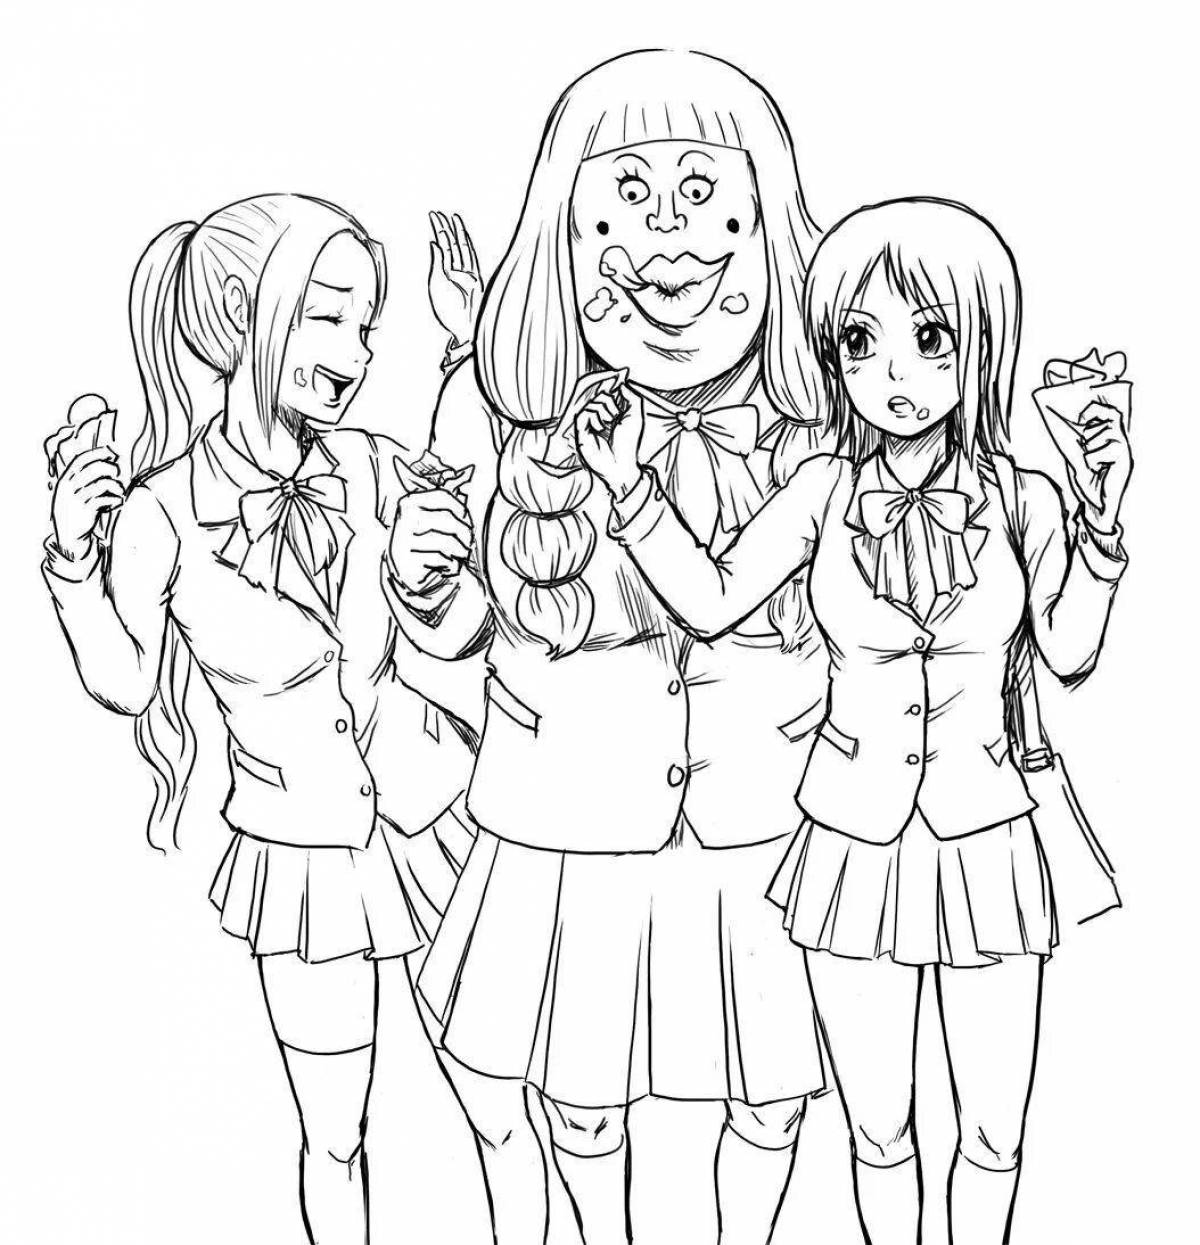 Adorable anime girlfriends coloring pages